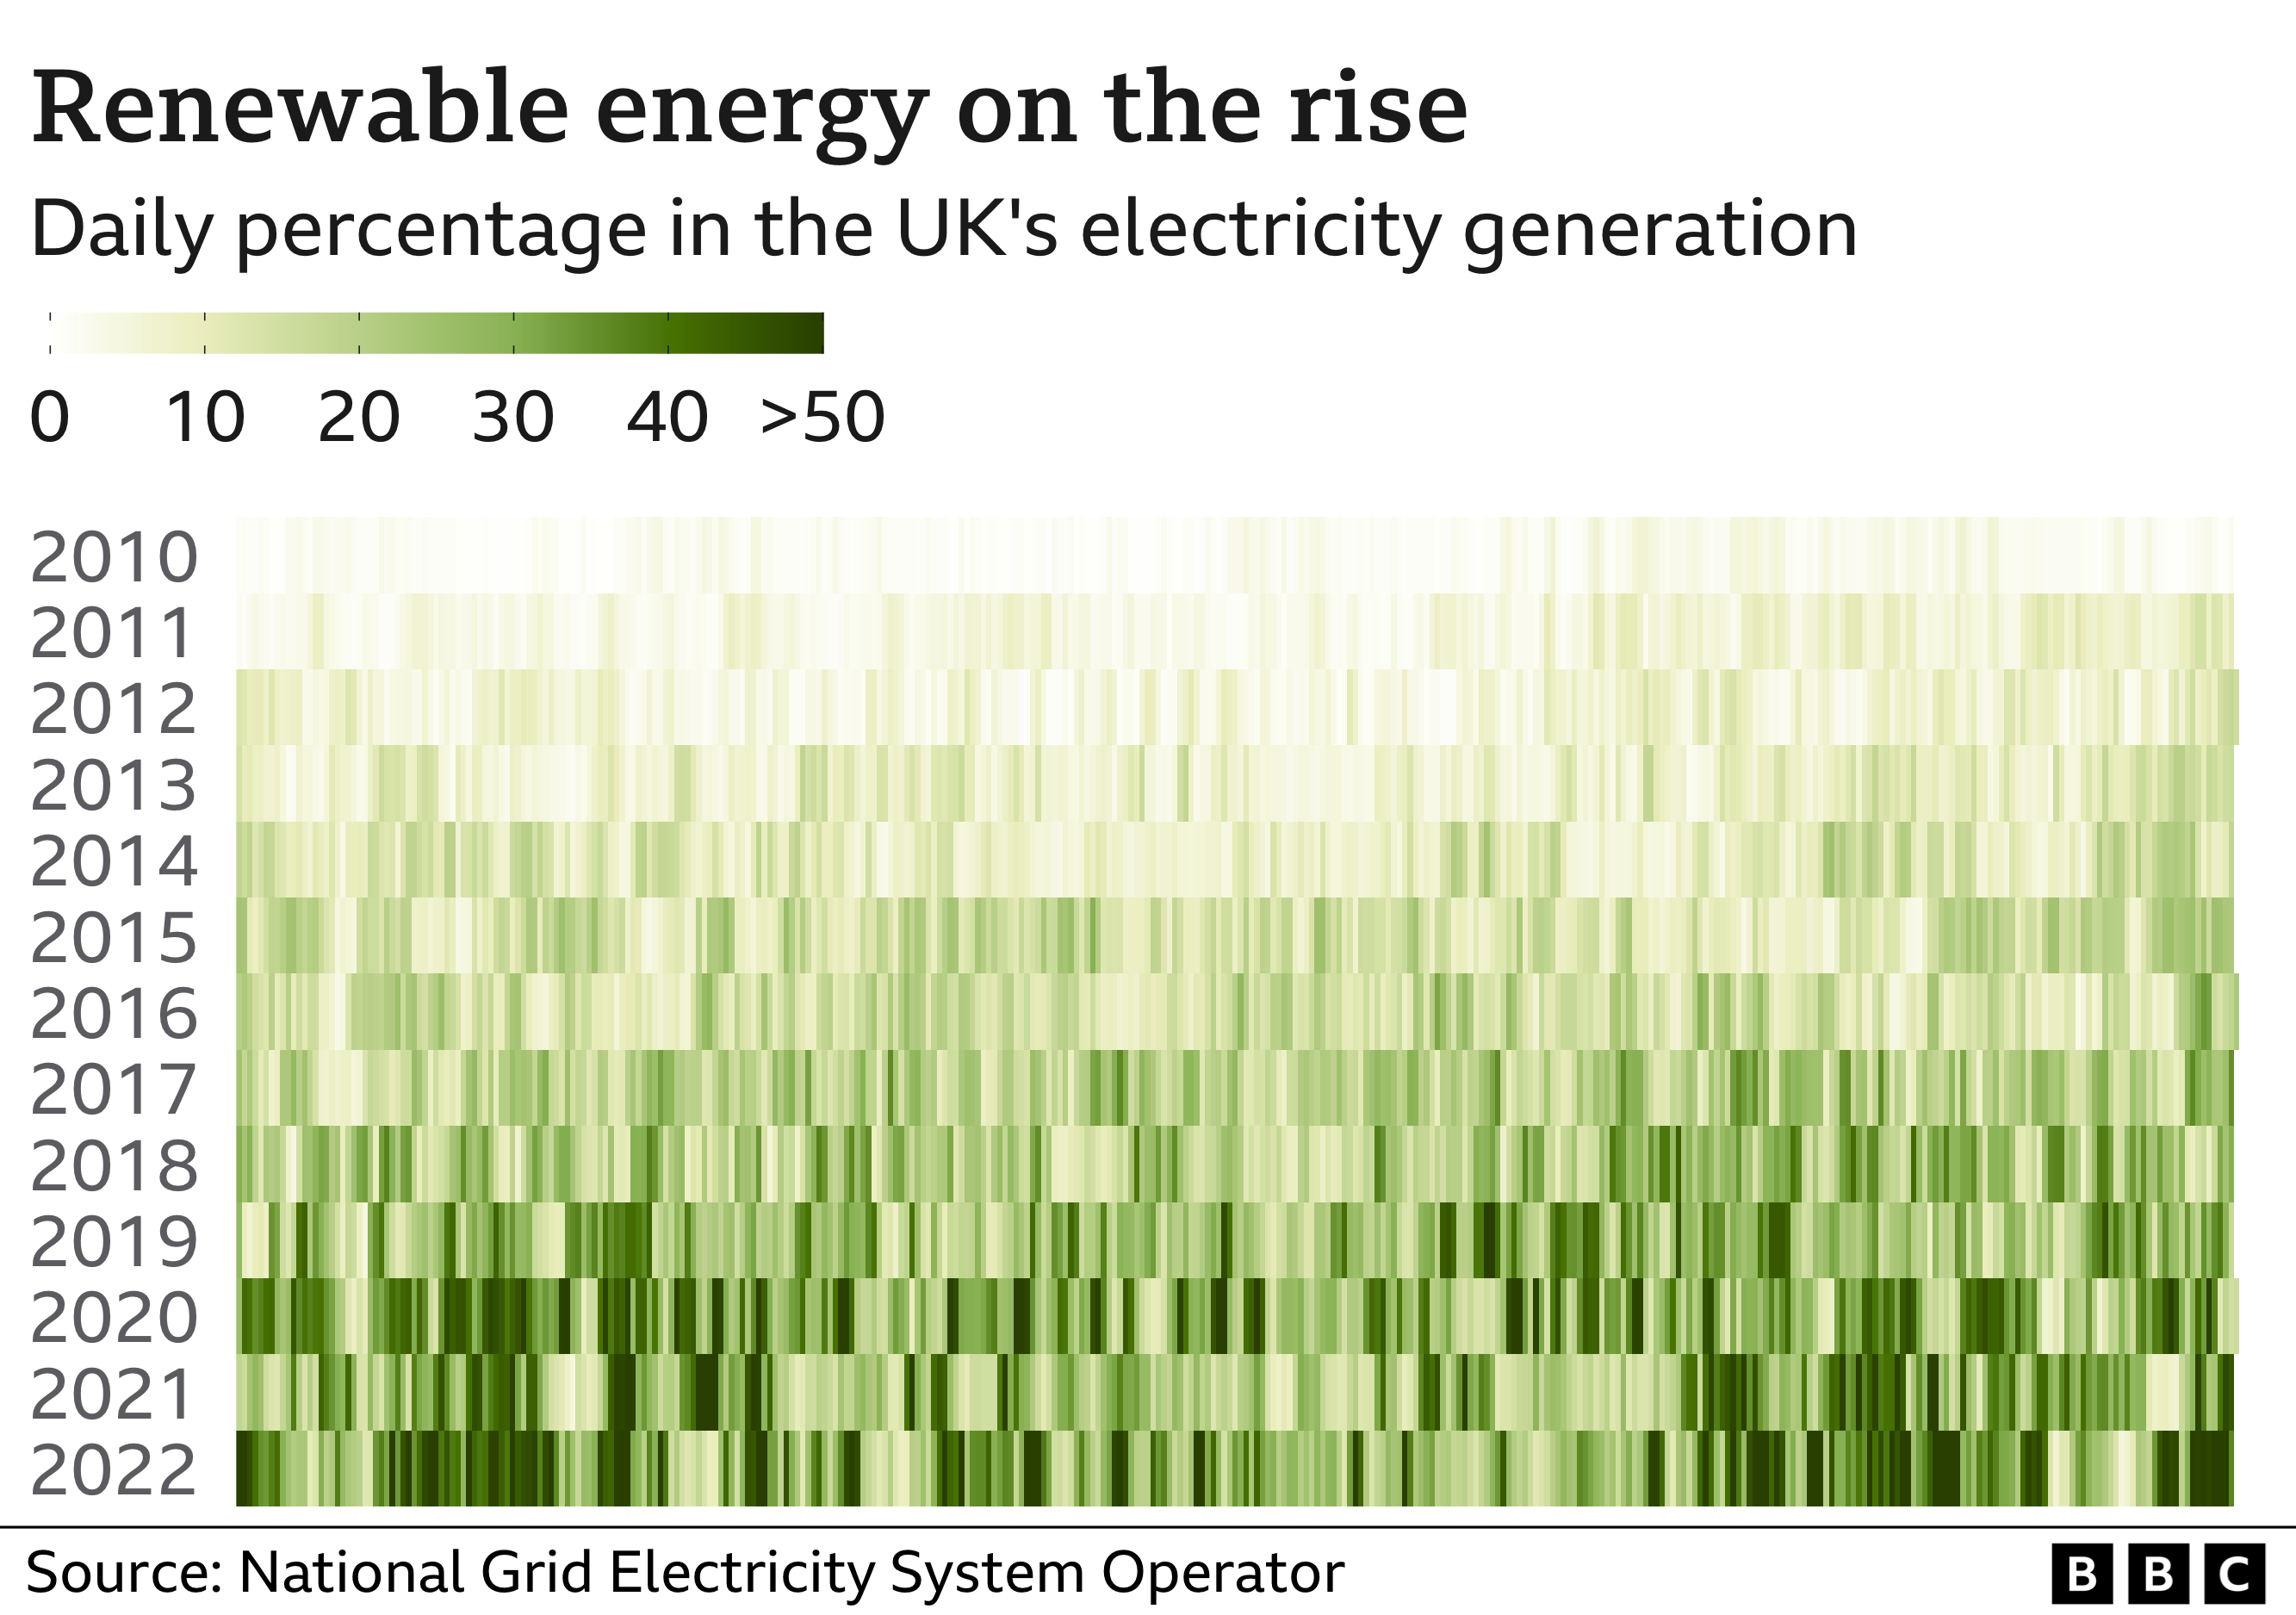 More of Great Britain's electricity is coming from renewable sources